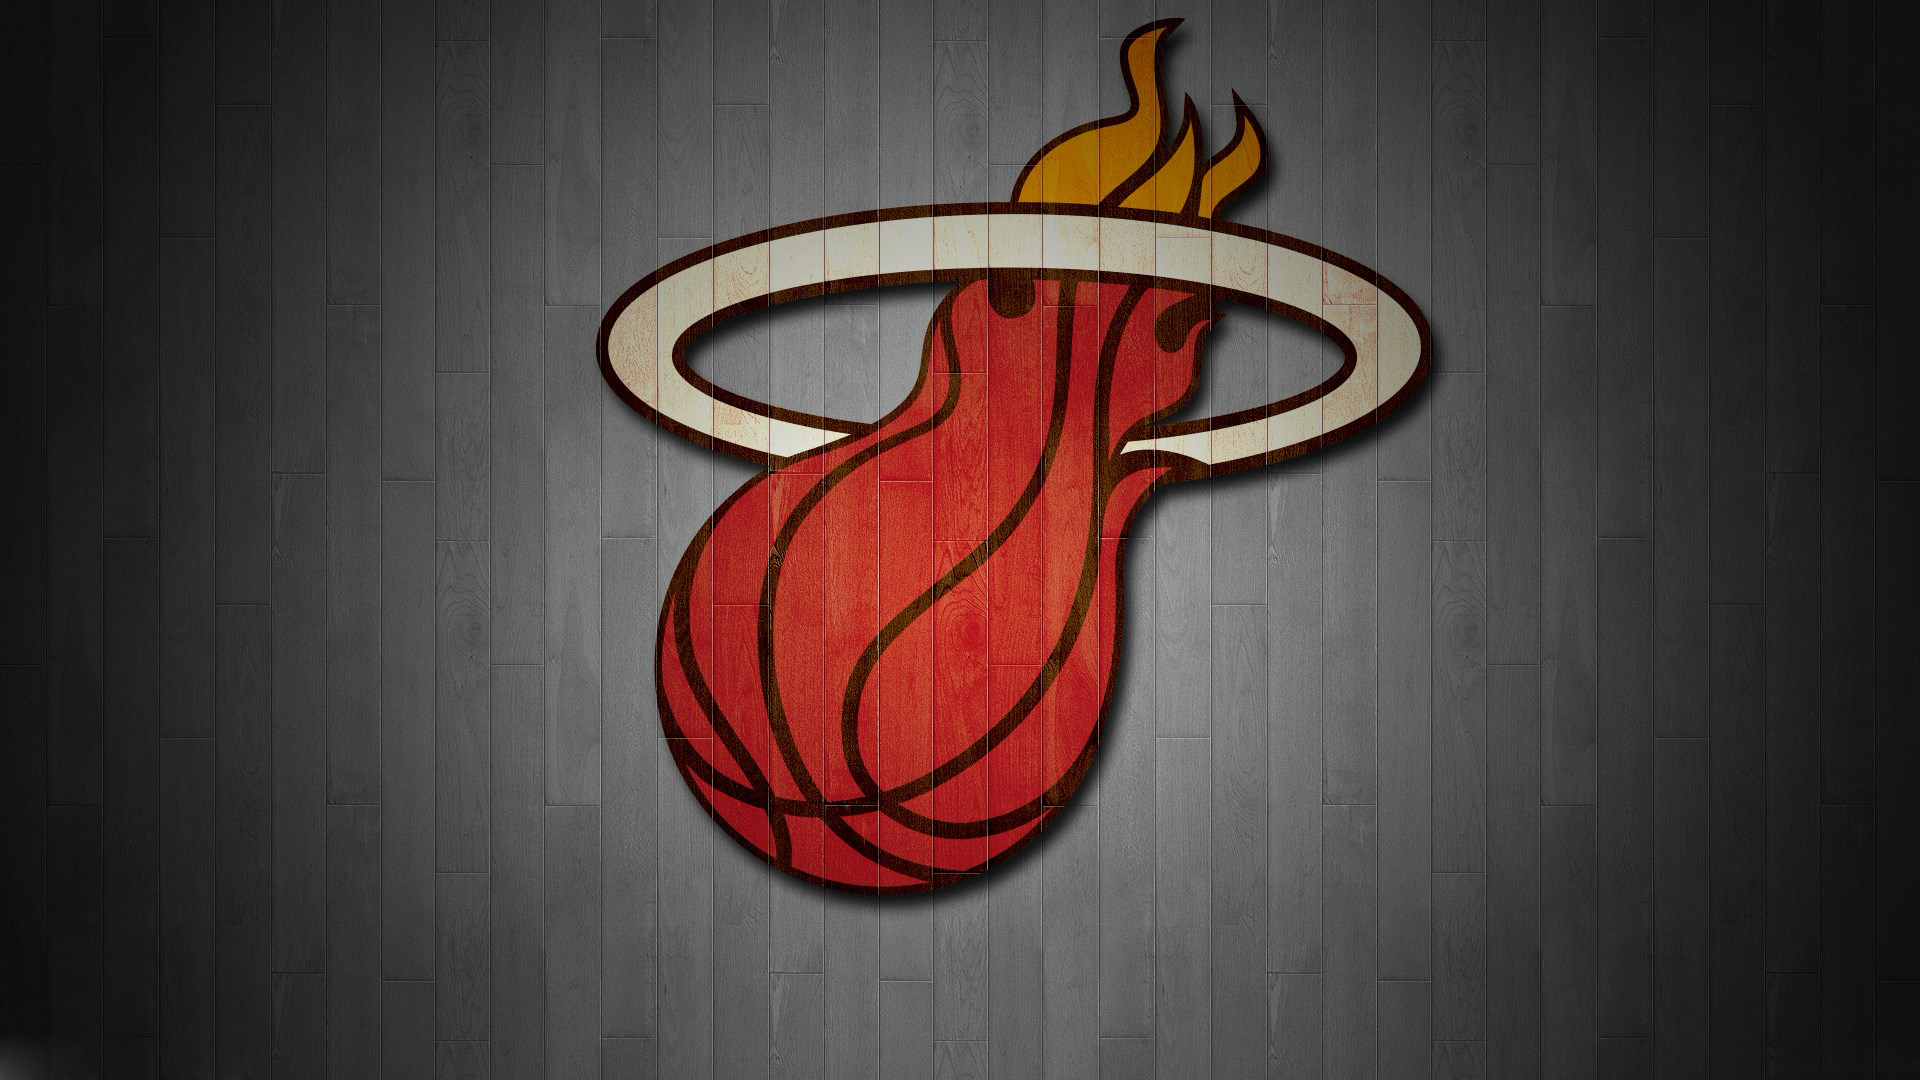 Best Miami Heat Wallpapers : Miami heat wallpapers filter by × select a ...